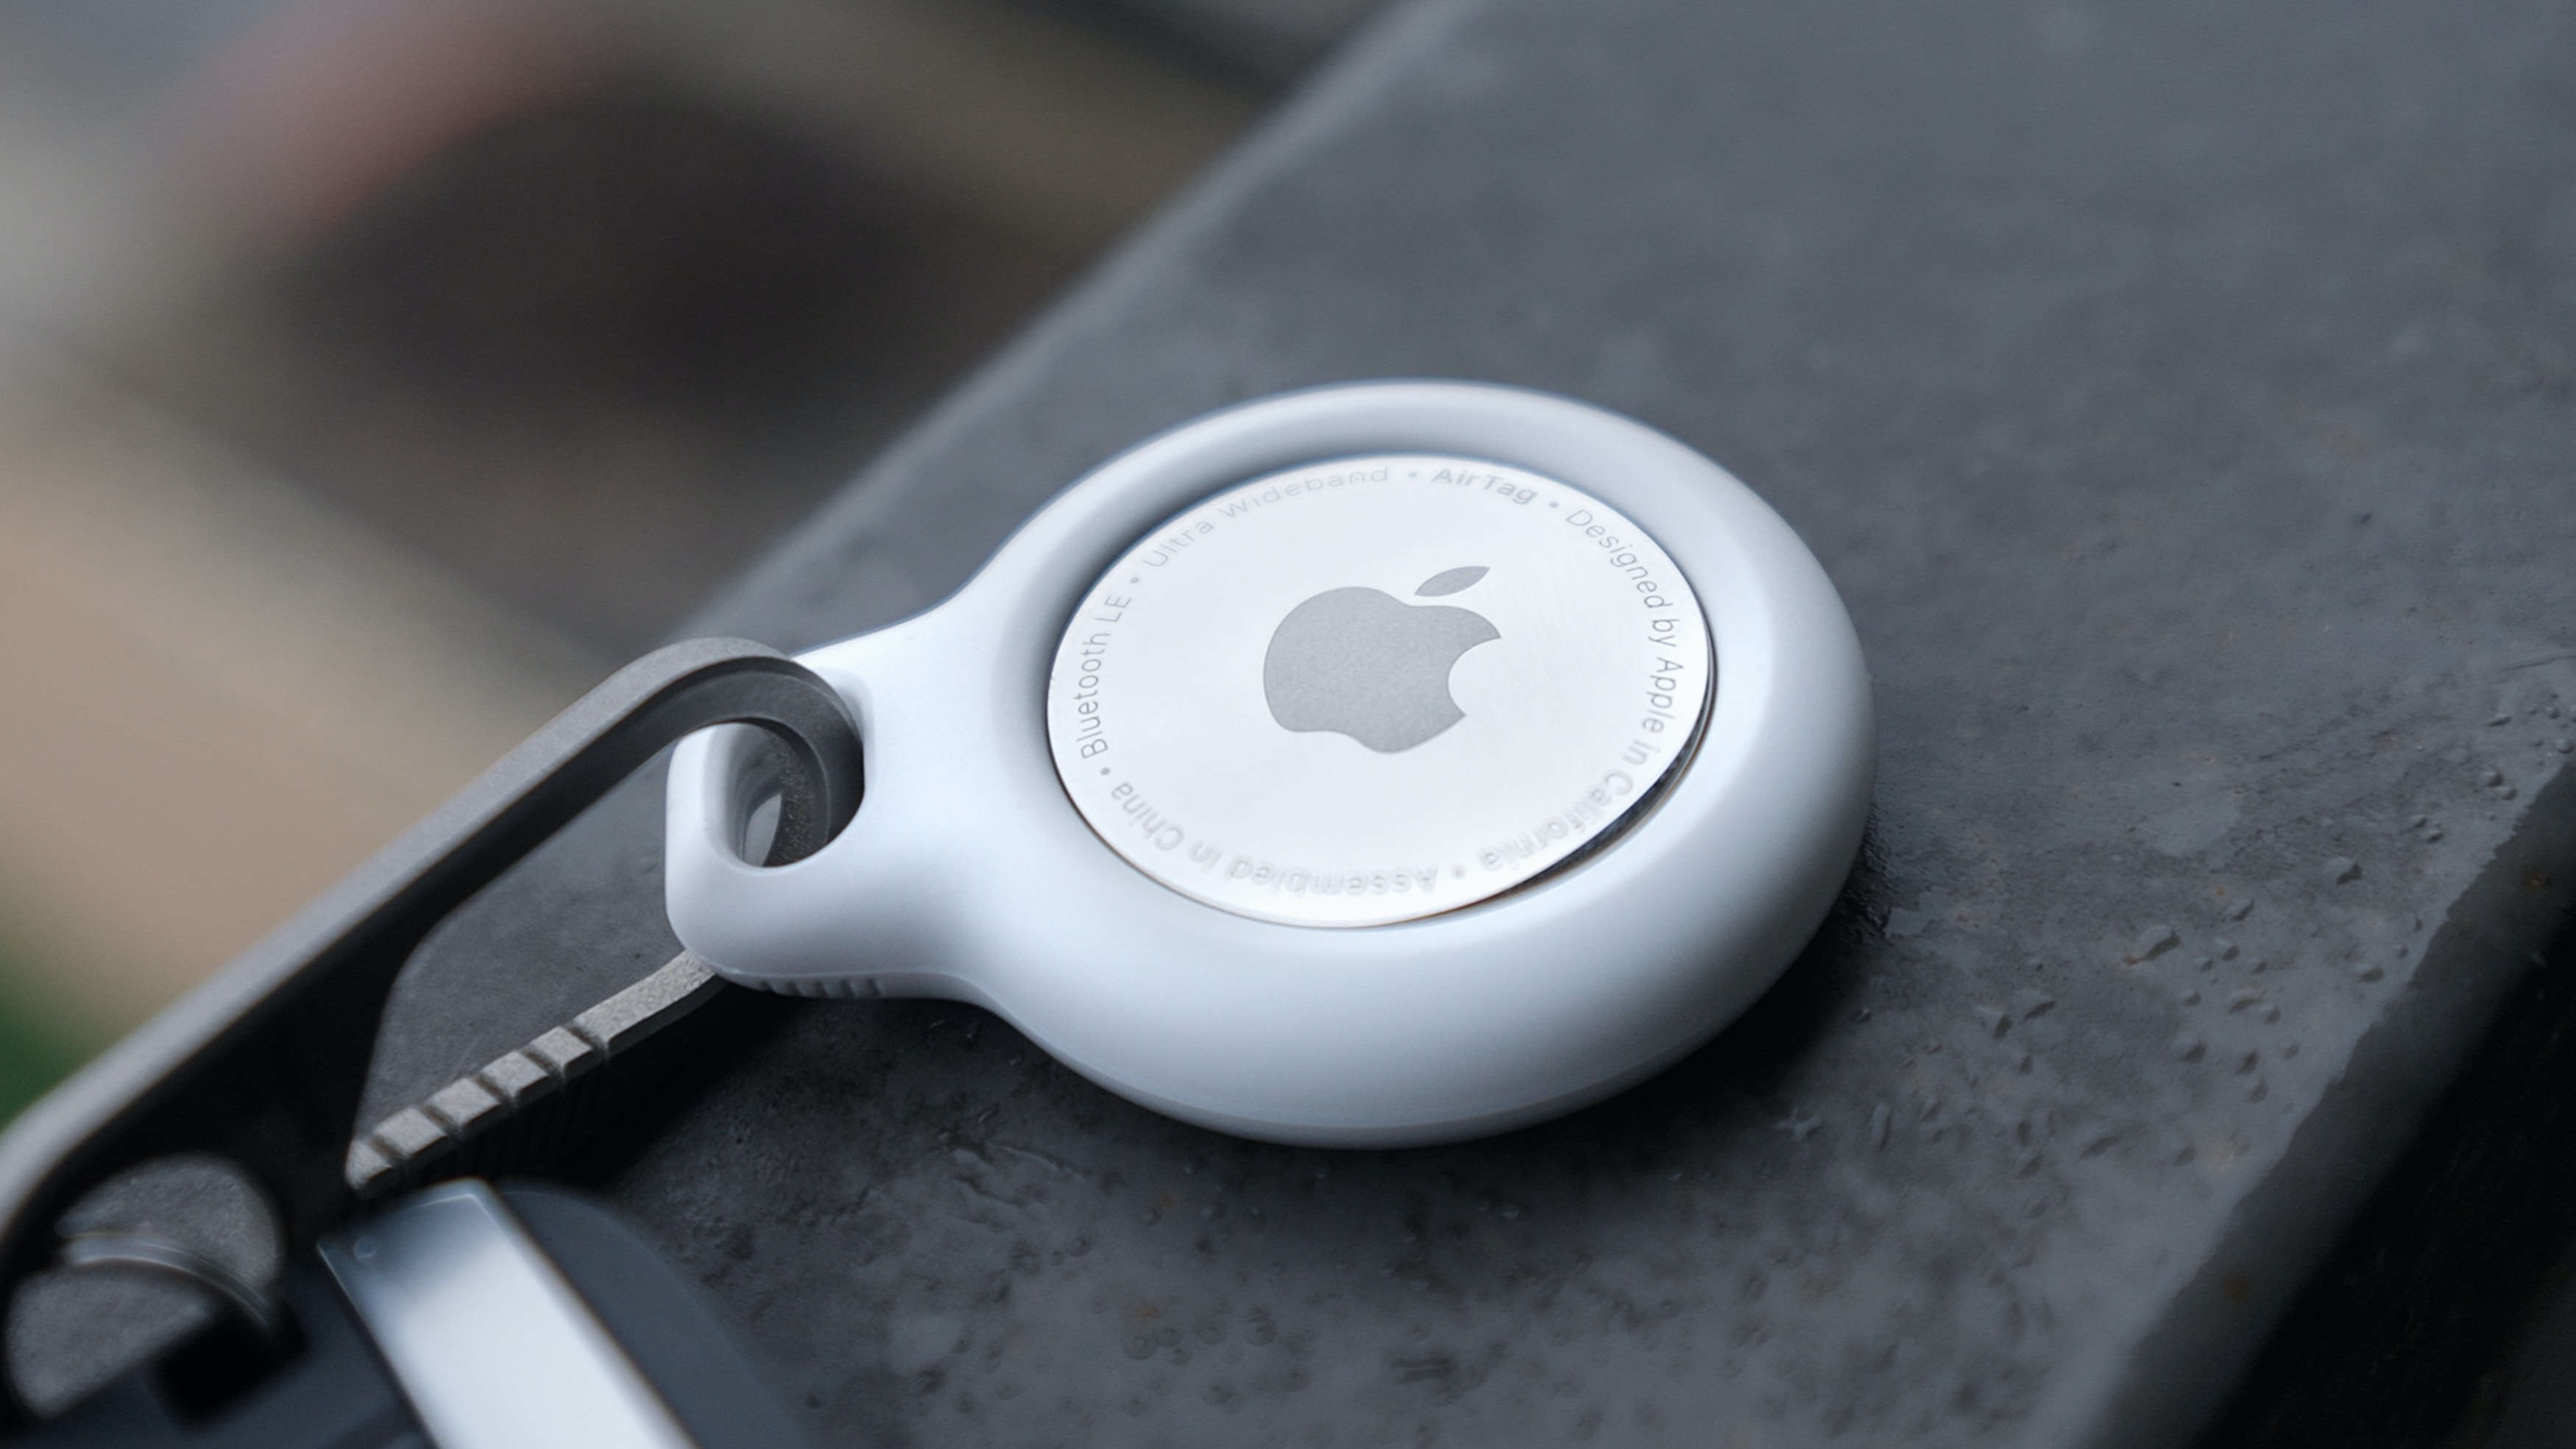 Apple AirTag wearable device to help track kids during the school year.